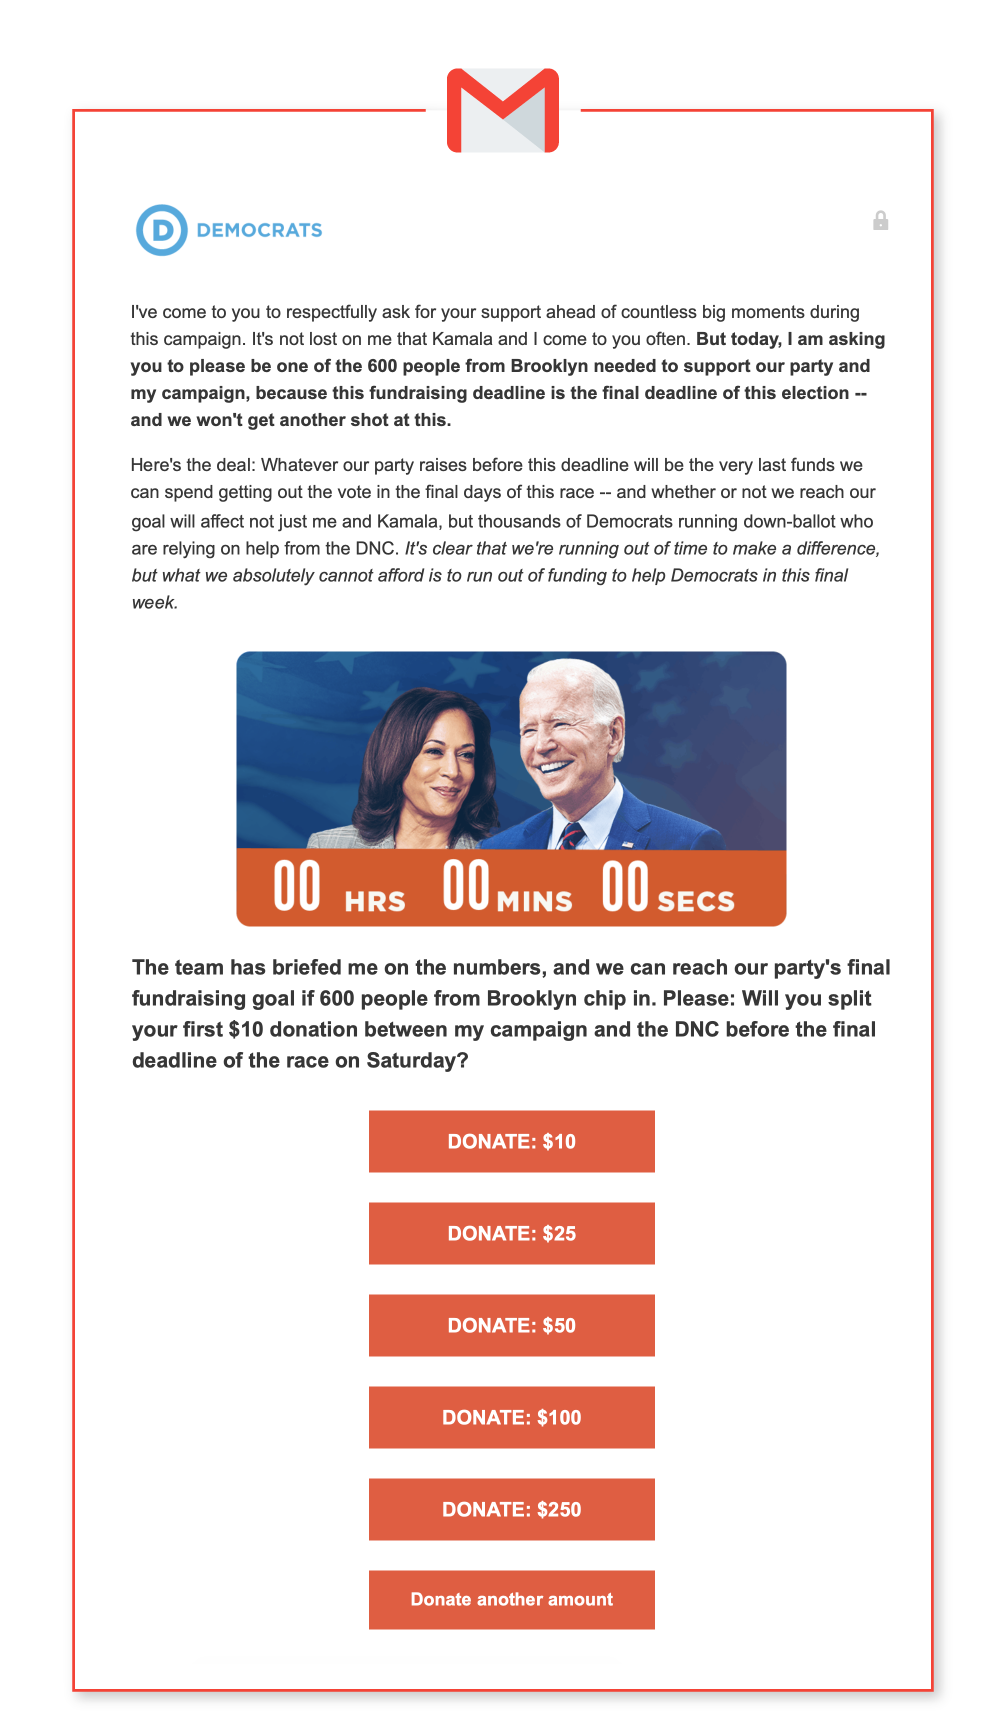 An email from the Democrats about asking for money for the Biden/Harris campaign.